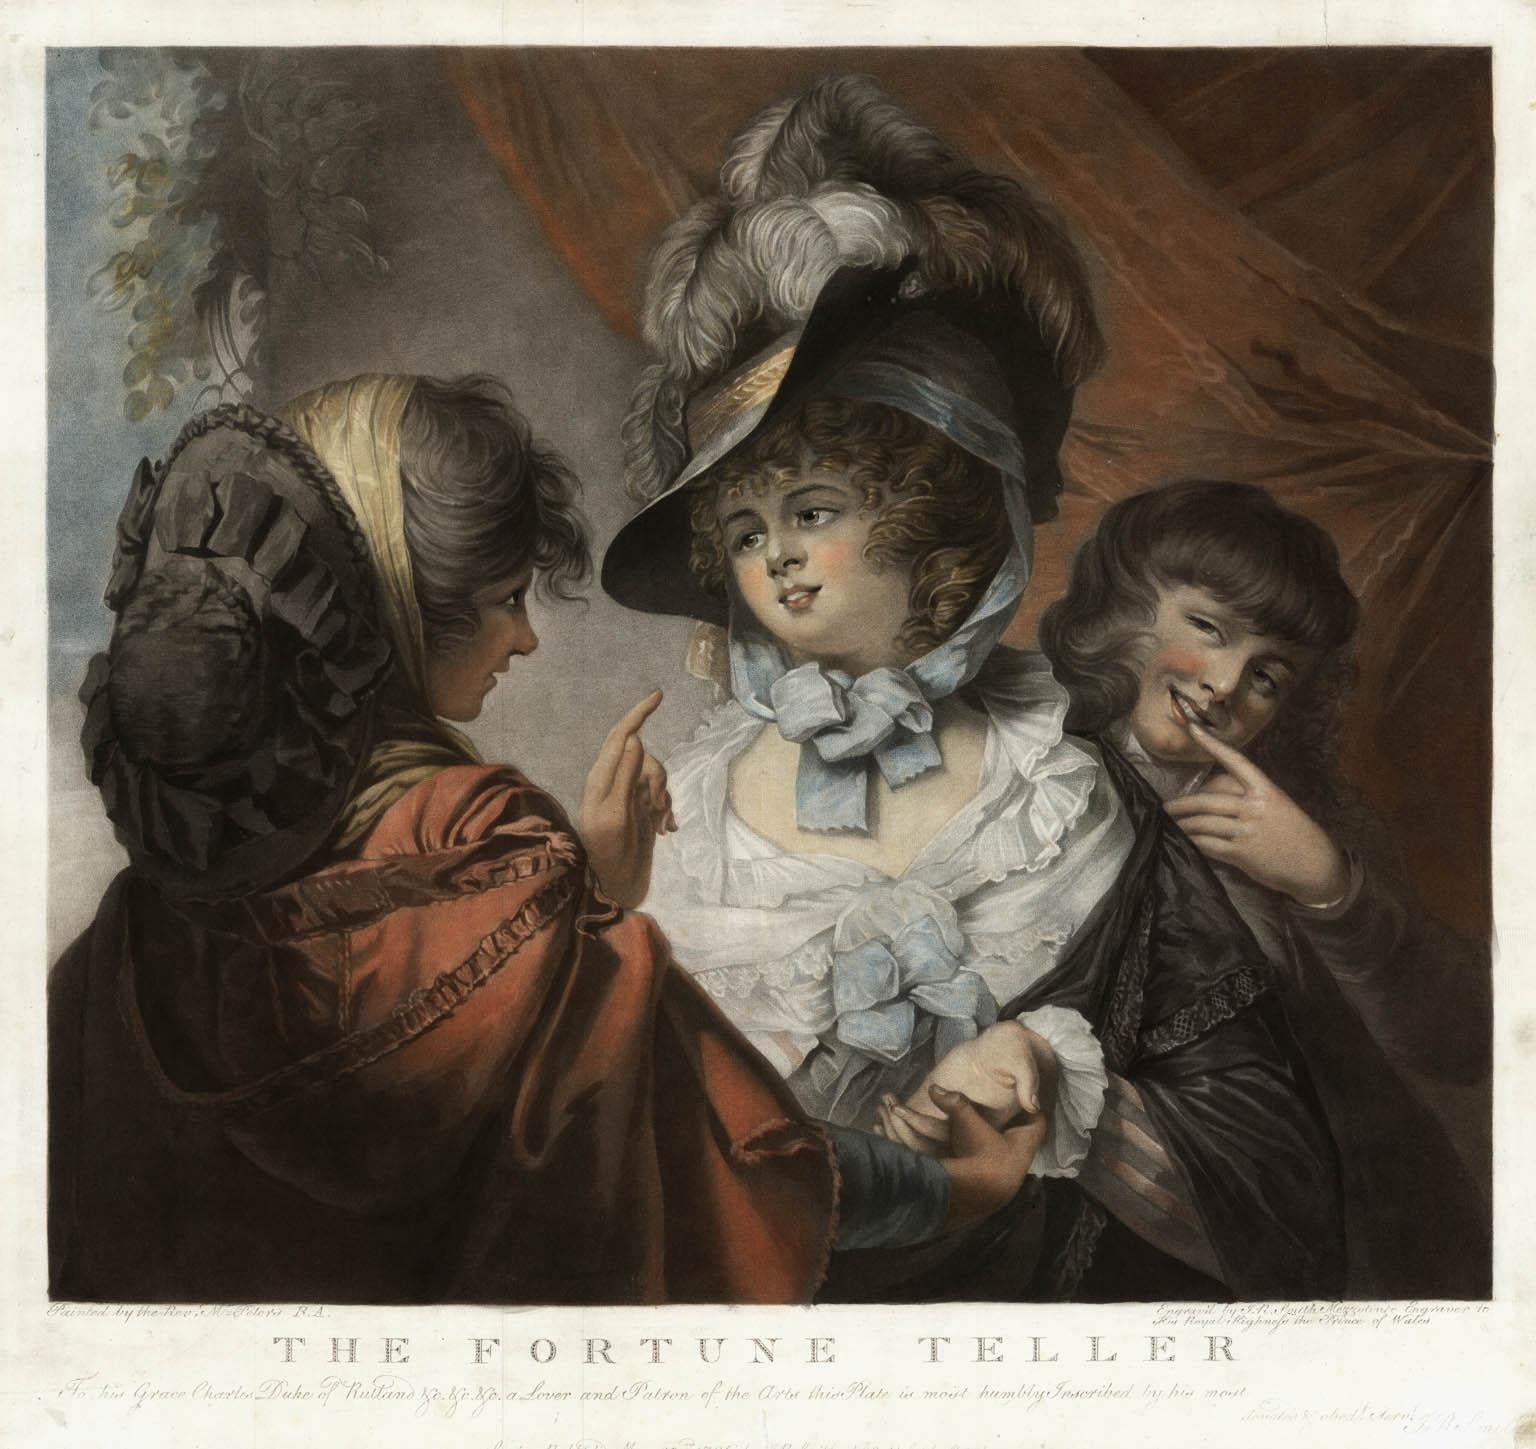 THE GAMESTERS and THE FORTUNE TELLER.

A wonderful pair of color printed mezzotint engravings after paintings by the Rev. Matthew William Peters, R.A.   Matthew William Peters (1742 – 20 March 1814) was an English portrait and genre painter who